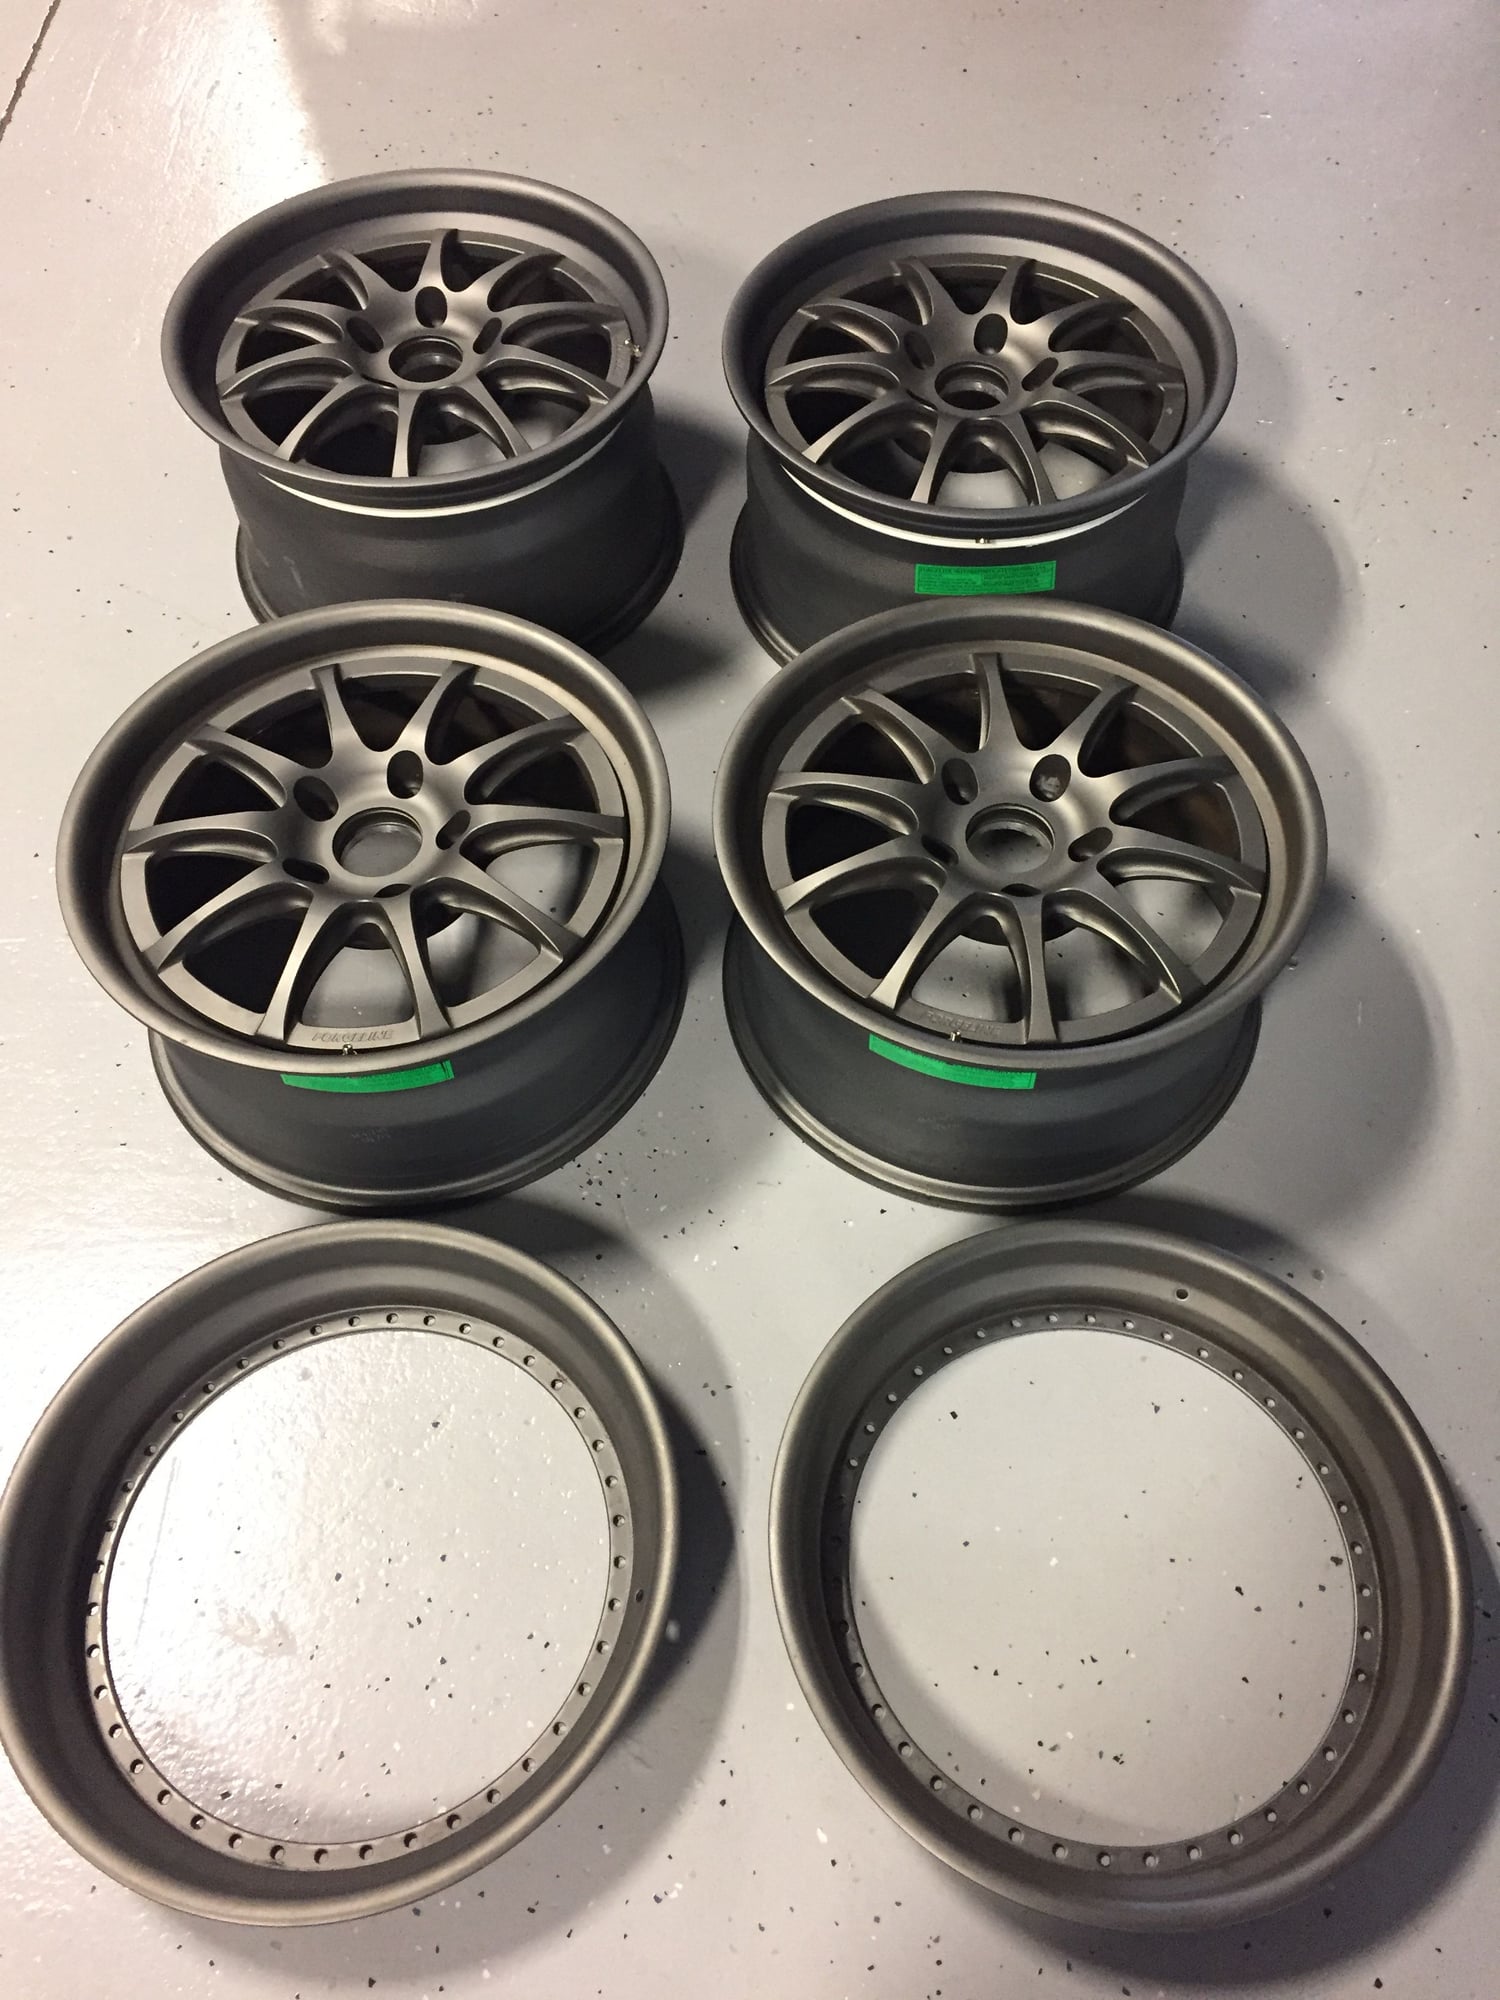 Wheels and Tires/Axles - ForgeLine Motorsports Wheels - Used - 1989 to 2005 Porsche All Models - Tampa, FL 33556, United States